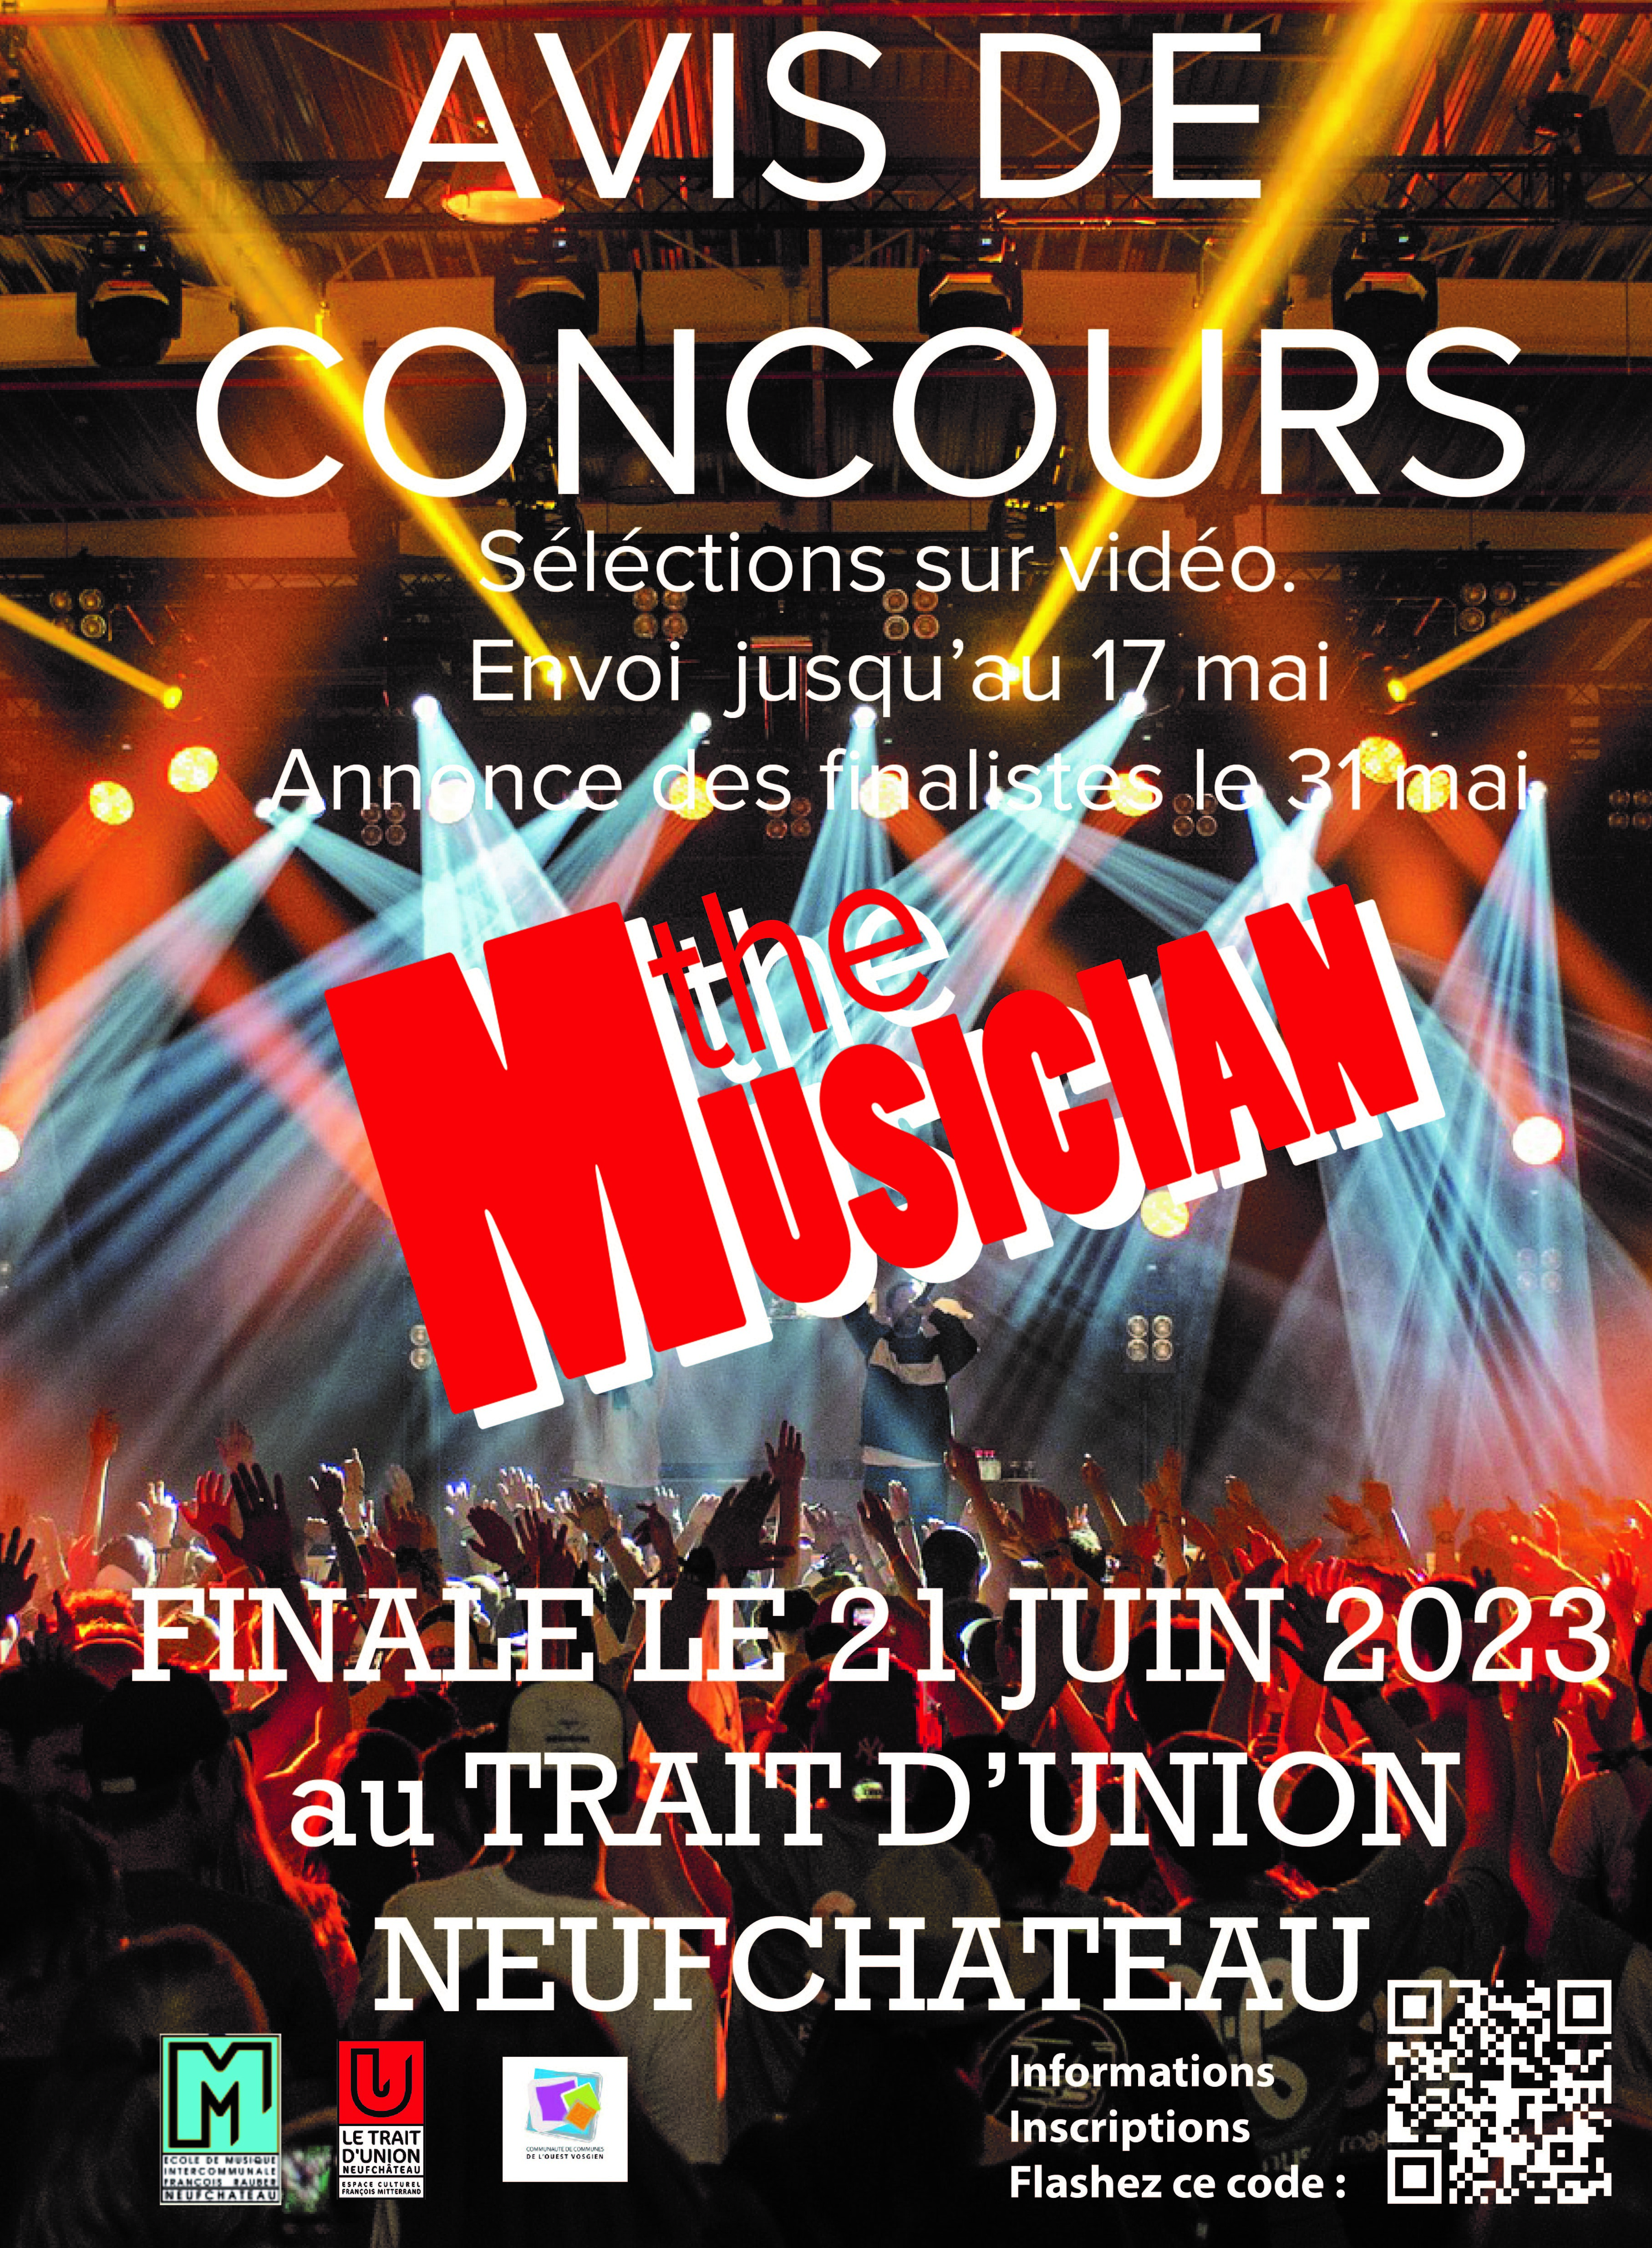 Concours The Musician